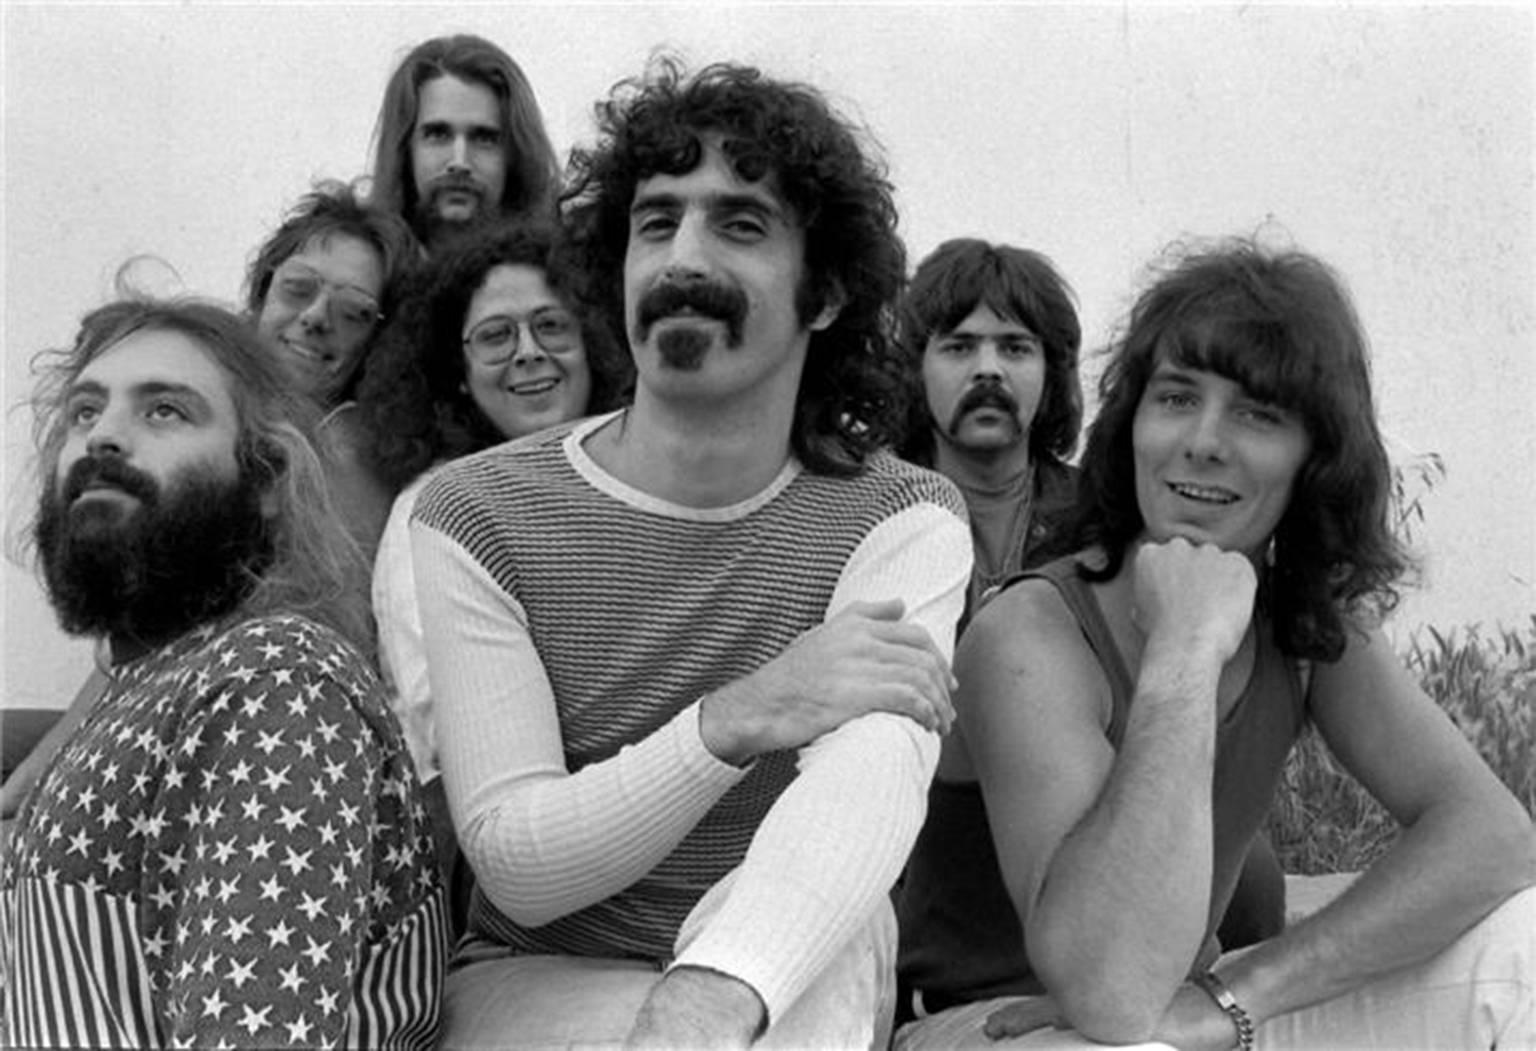 Henry Diltz Black and White Photograph - Frank Zappa & The Mothers of Invention